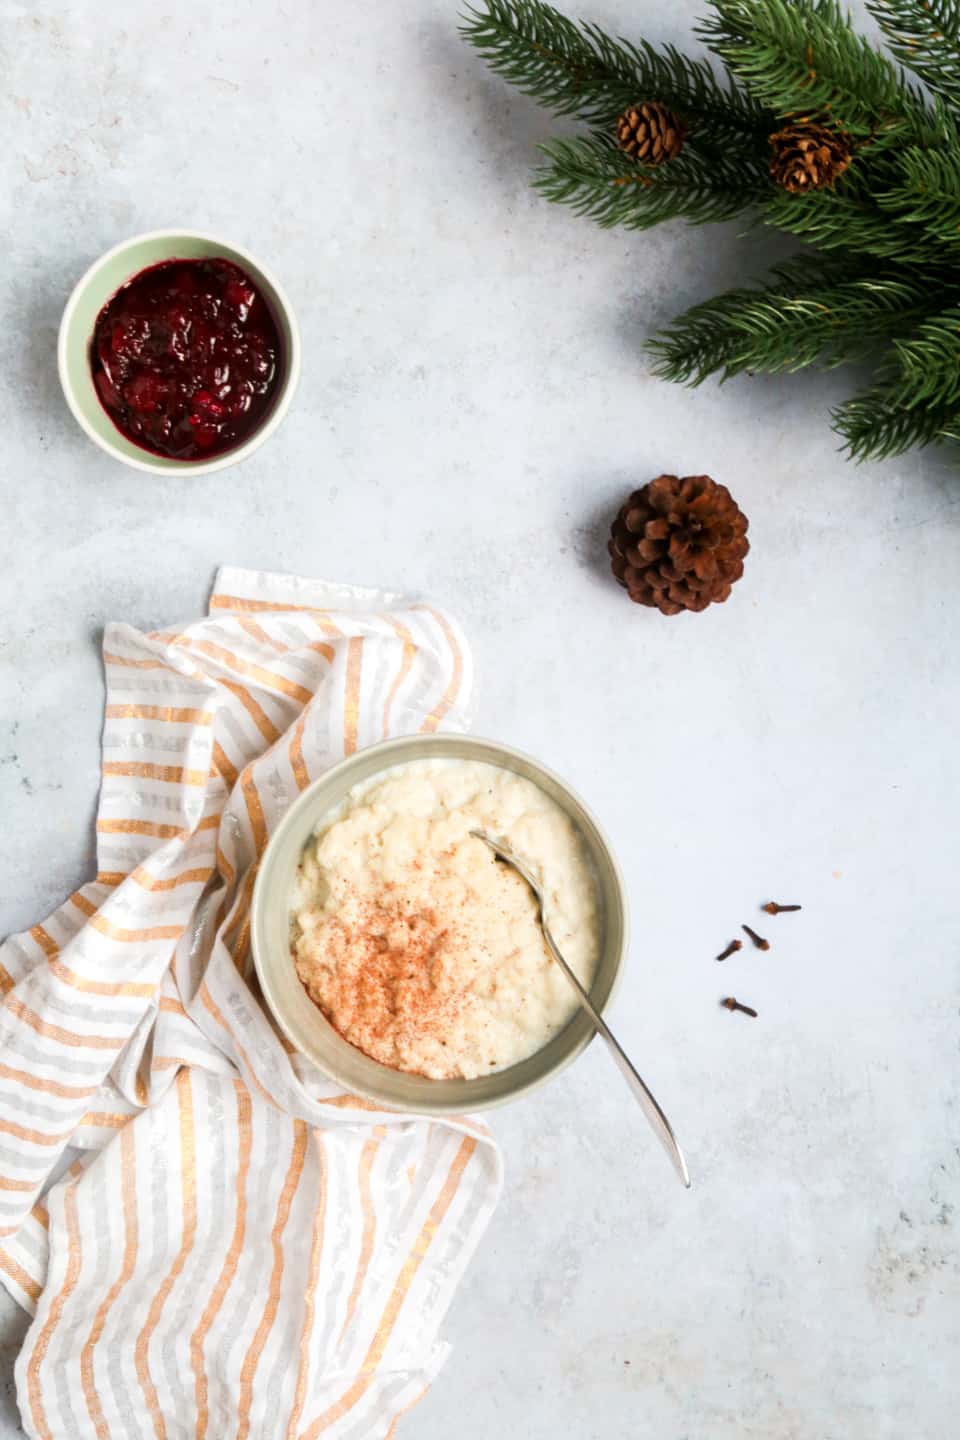 Bread sauce is a simple, yet classic British dish served on Christmas Day.